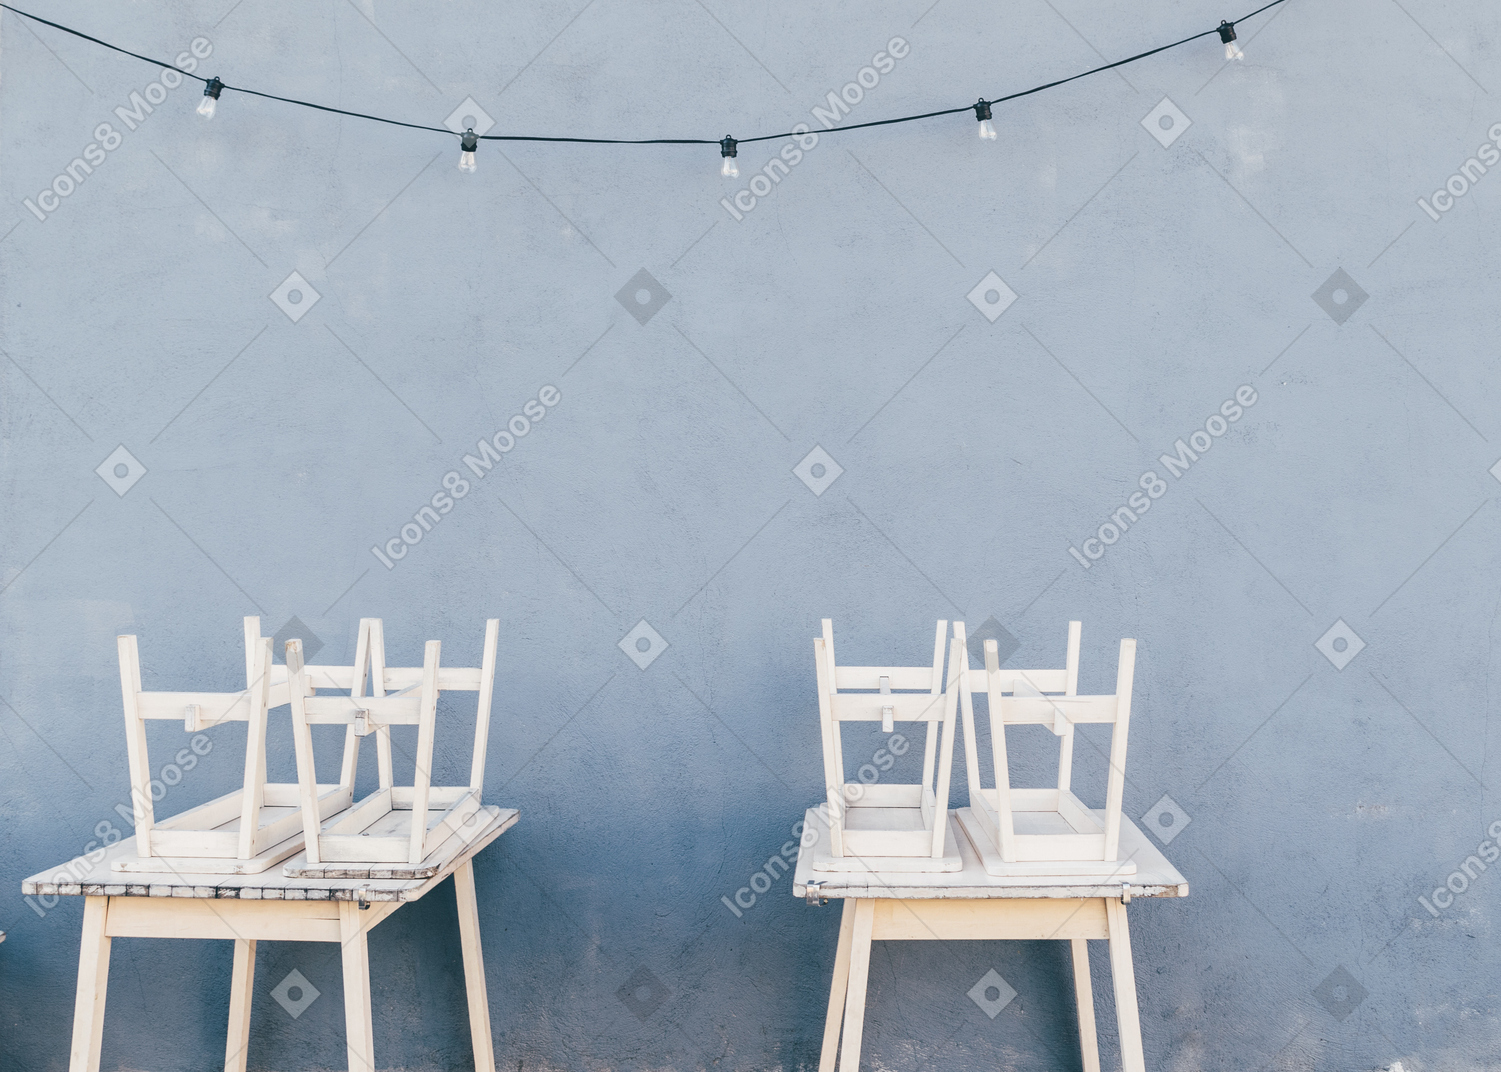 White chairs on white tables in blue room